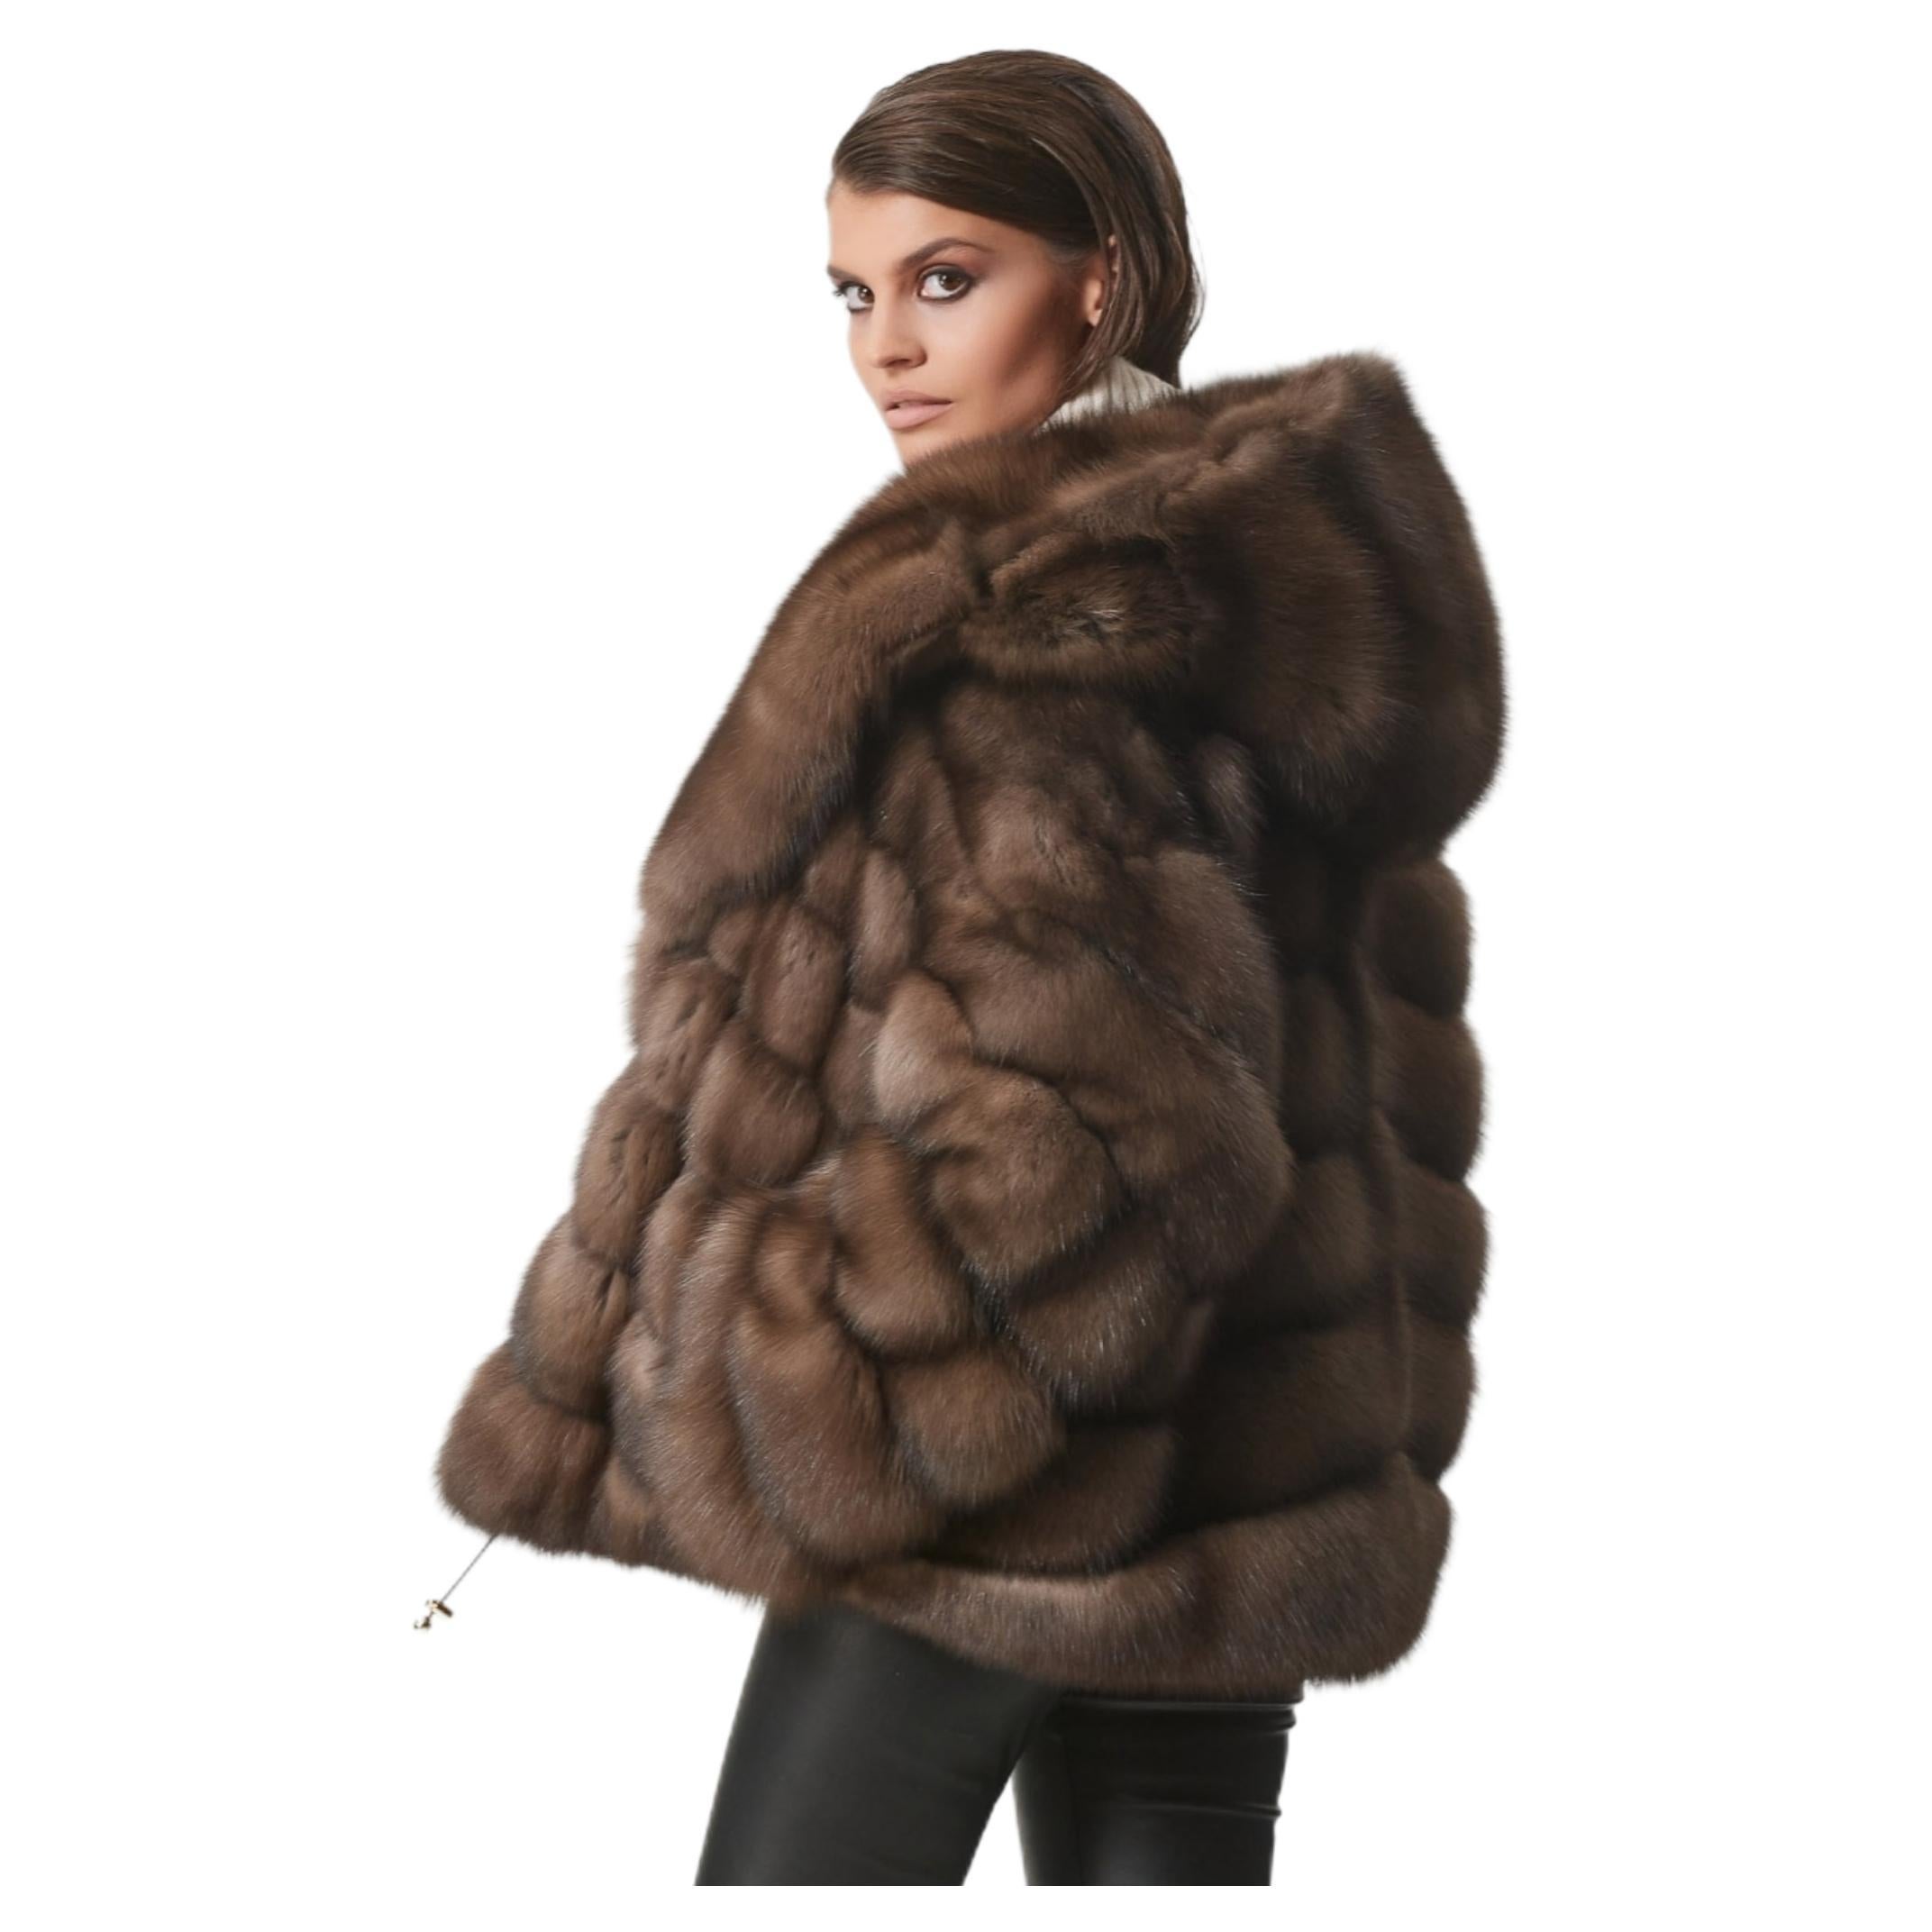 Sobol Russian Sable Jacket size Oversized XL 18-20 For Sale